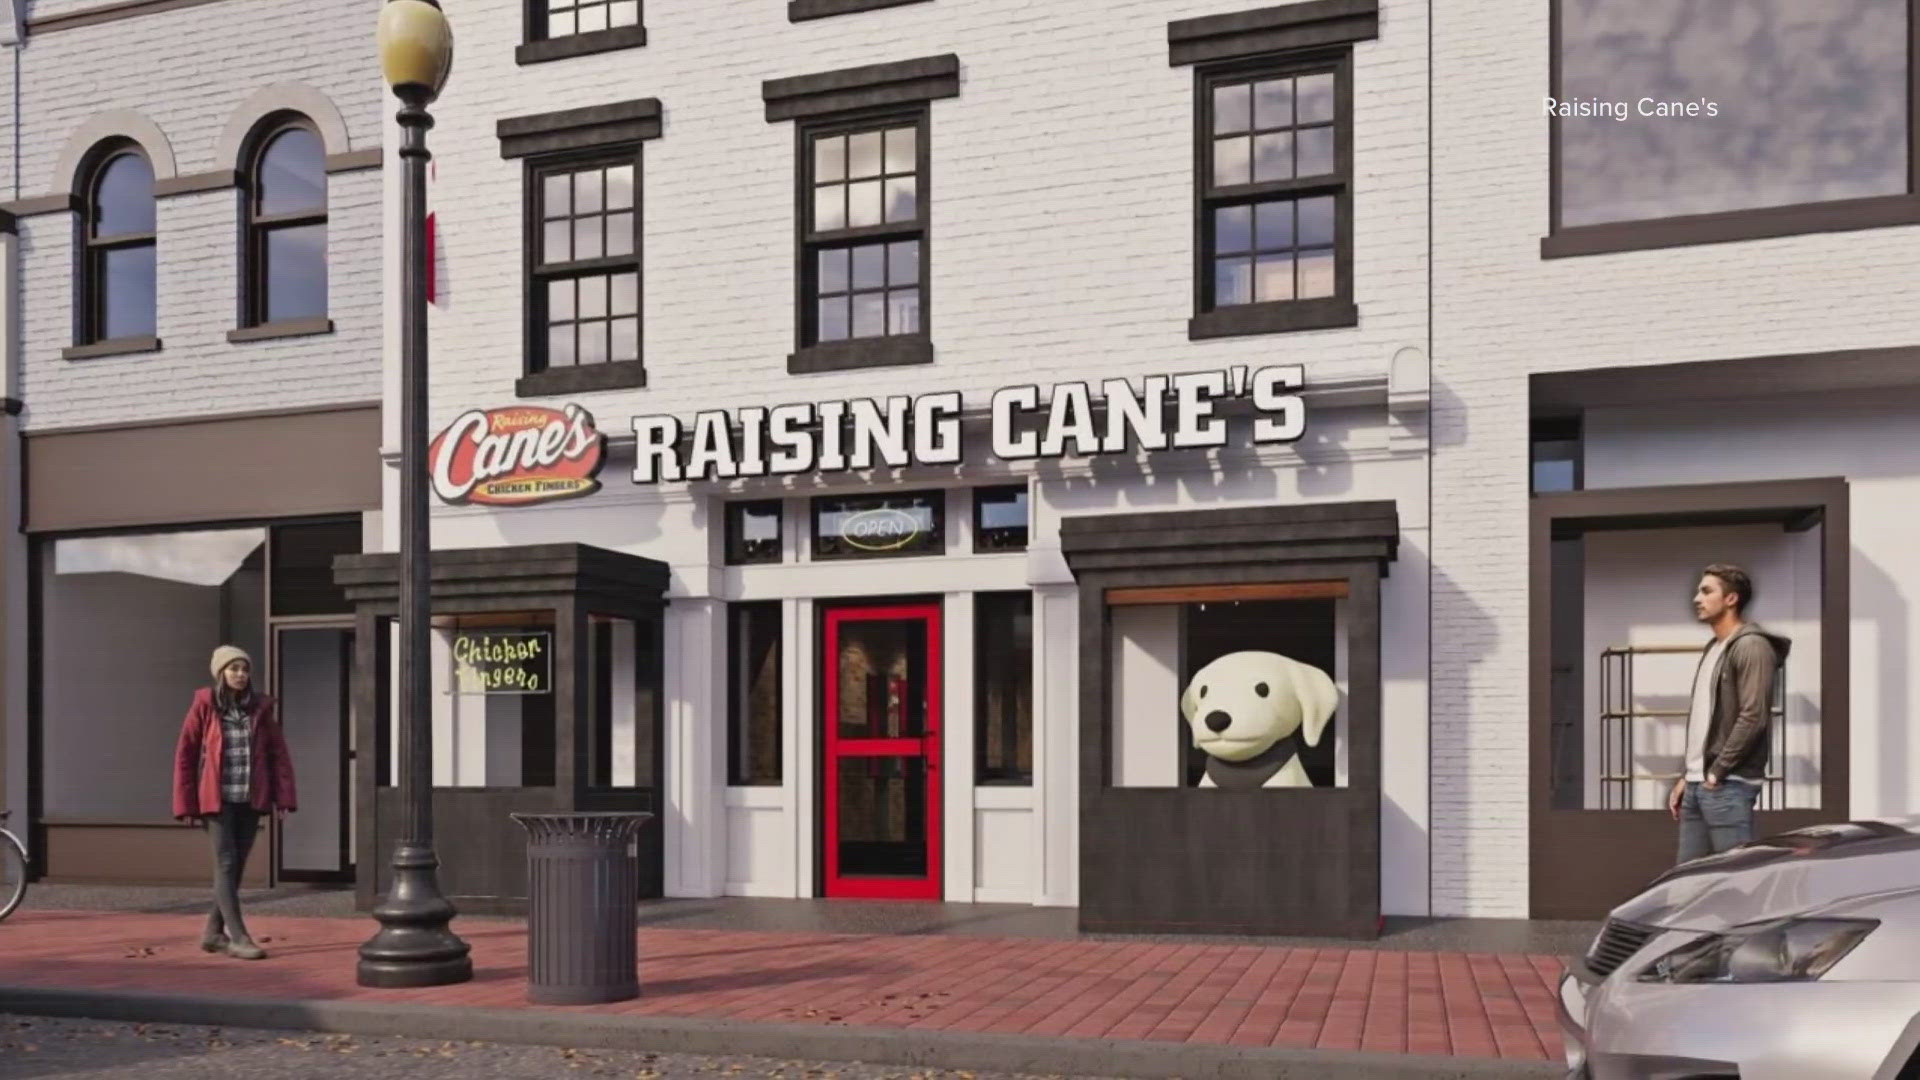 The decision to open another location in D.C. comes after Raising Cane's saw success with its first location at Union Station.